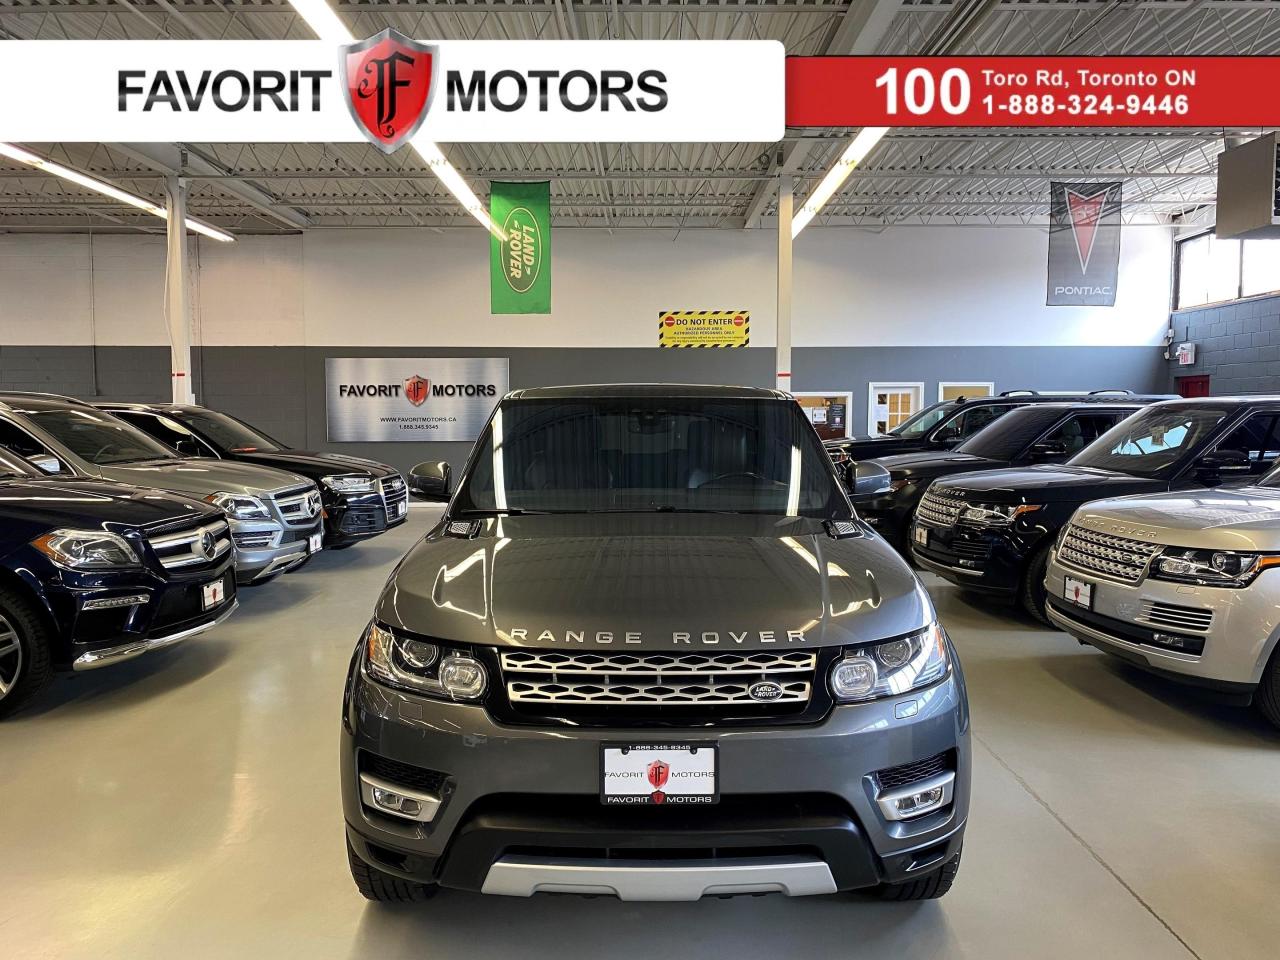 Range Rover Dealership North York  - Visit Our Fort Pierce Land Here At Land Rover Treasure Coast, We Believe In Treating Each And Every Person Who Steps Through Our Doors To The Ultimate Car Dealership Experience.